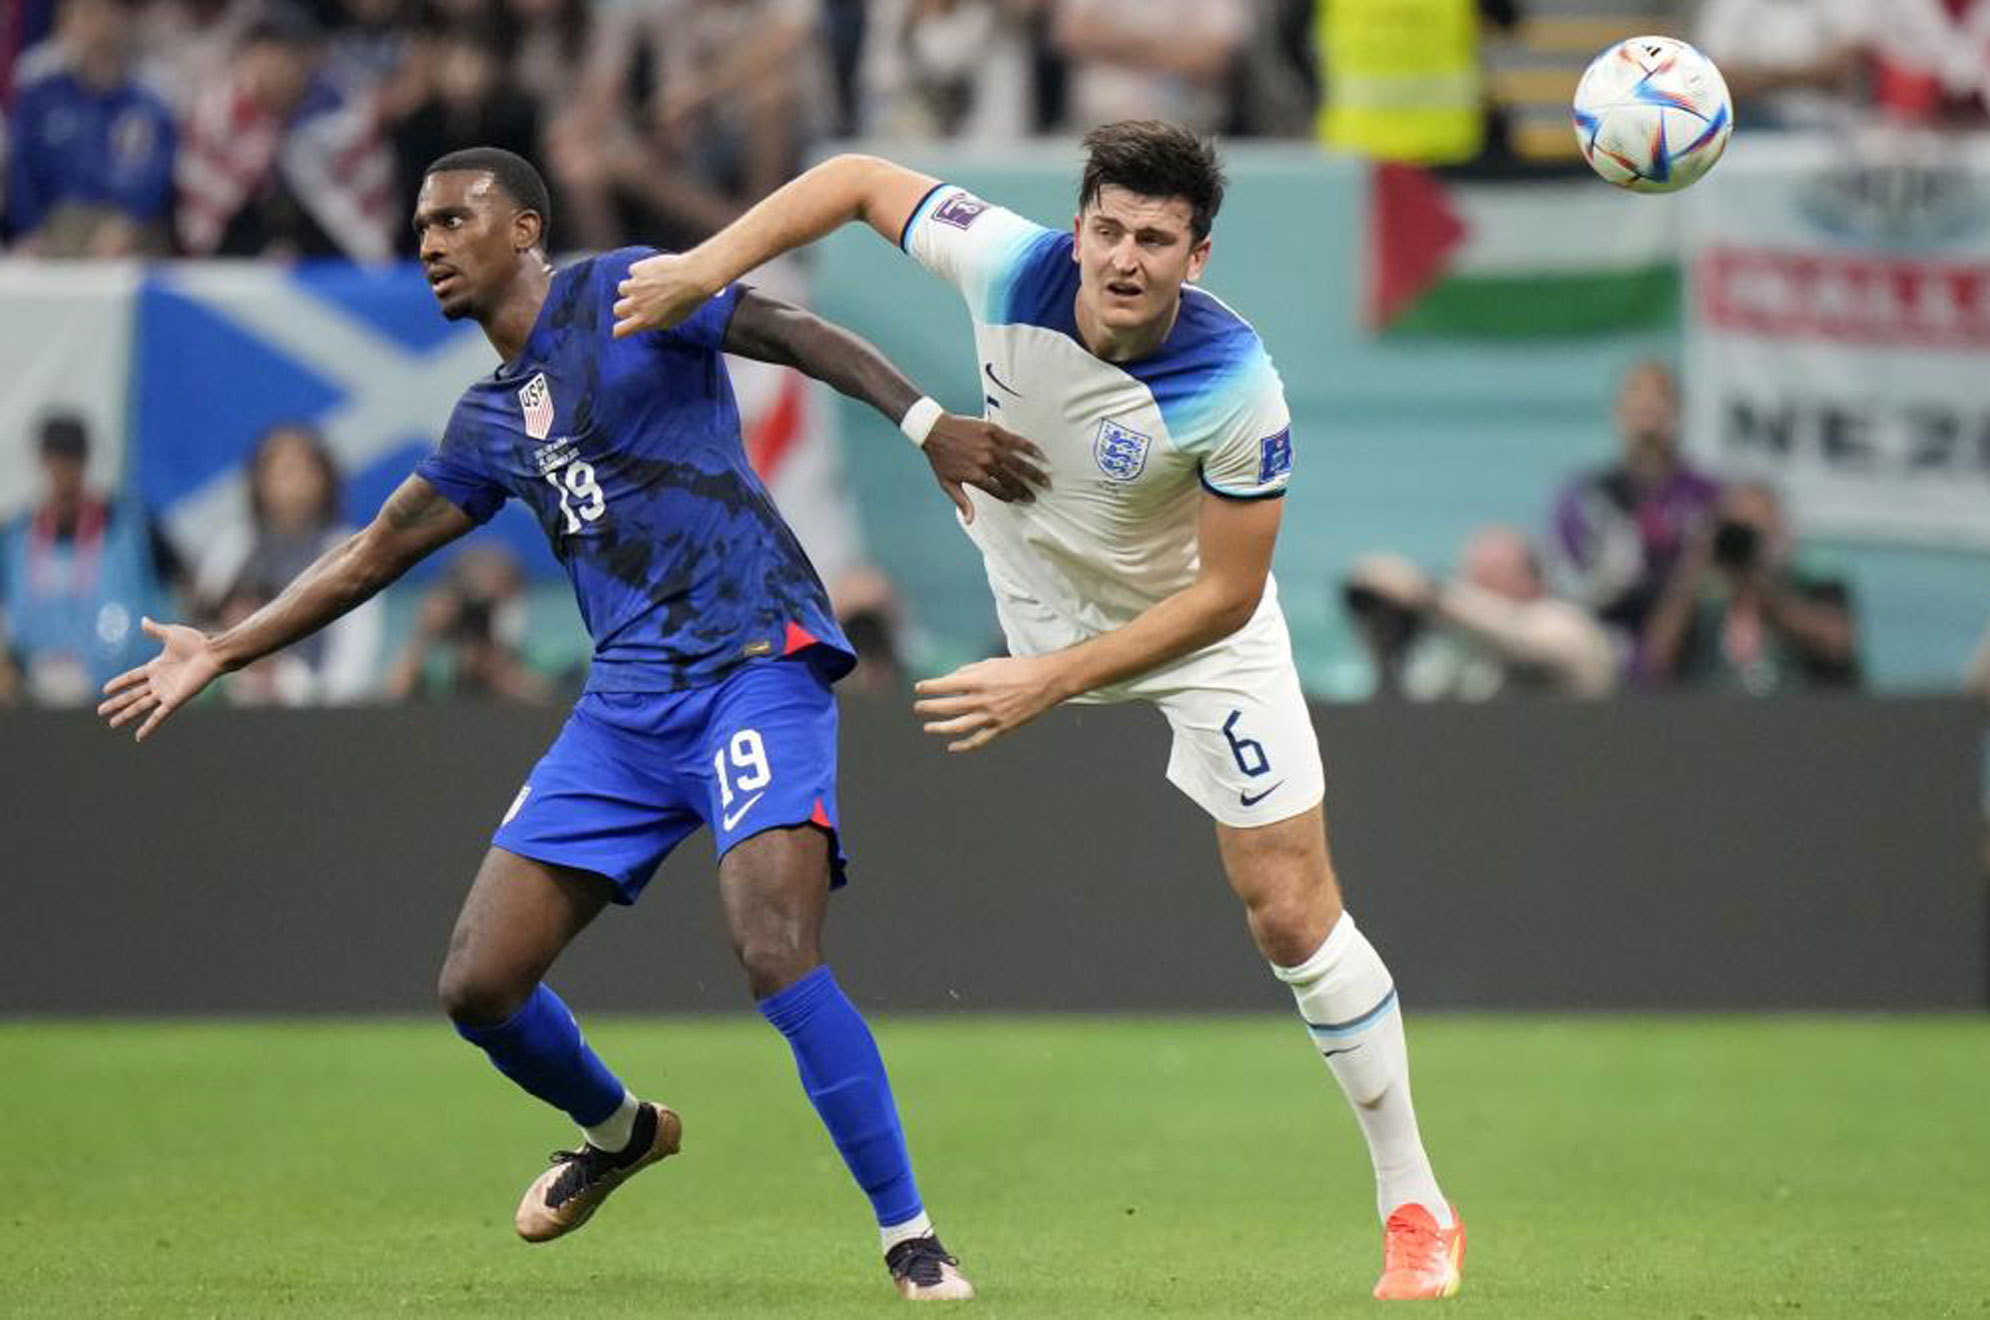 Maguire vs the USMNT